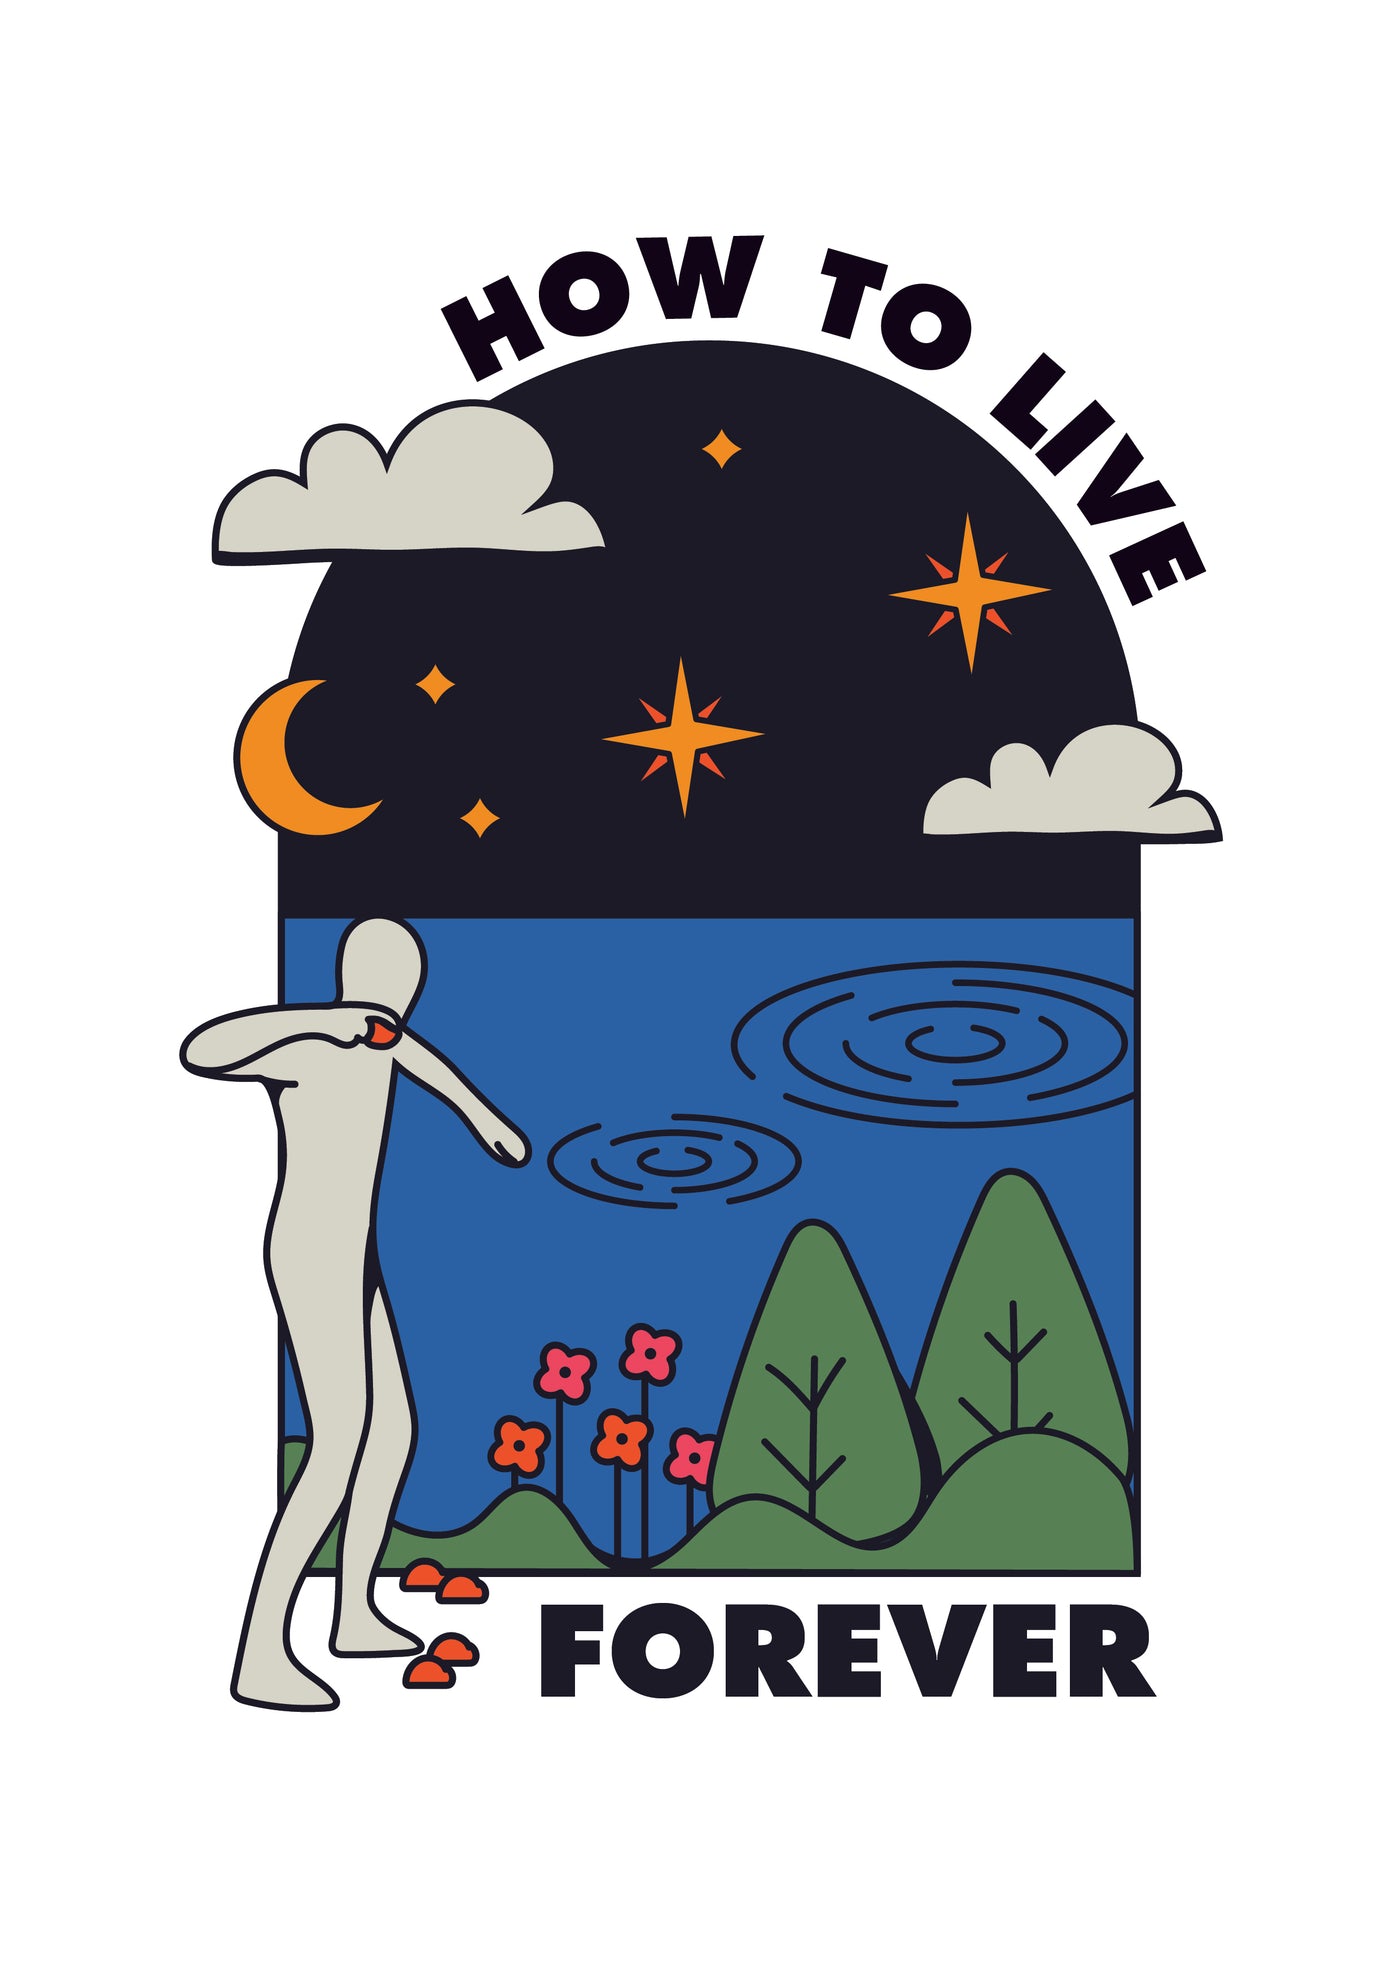 Exercise: How To Live Forever